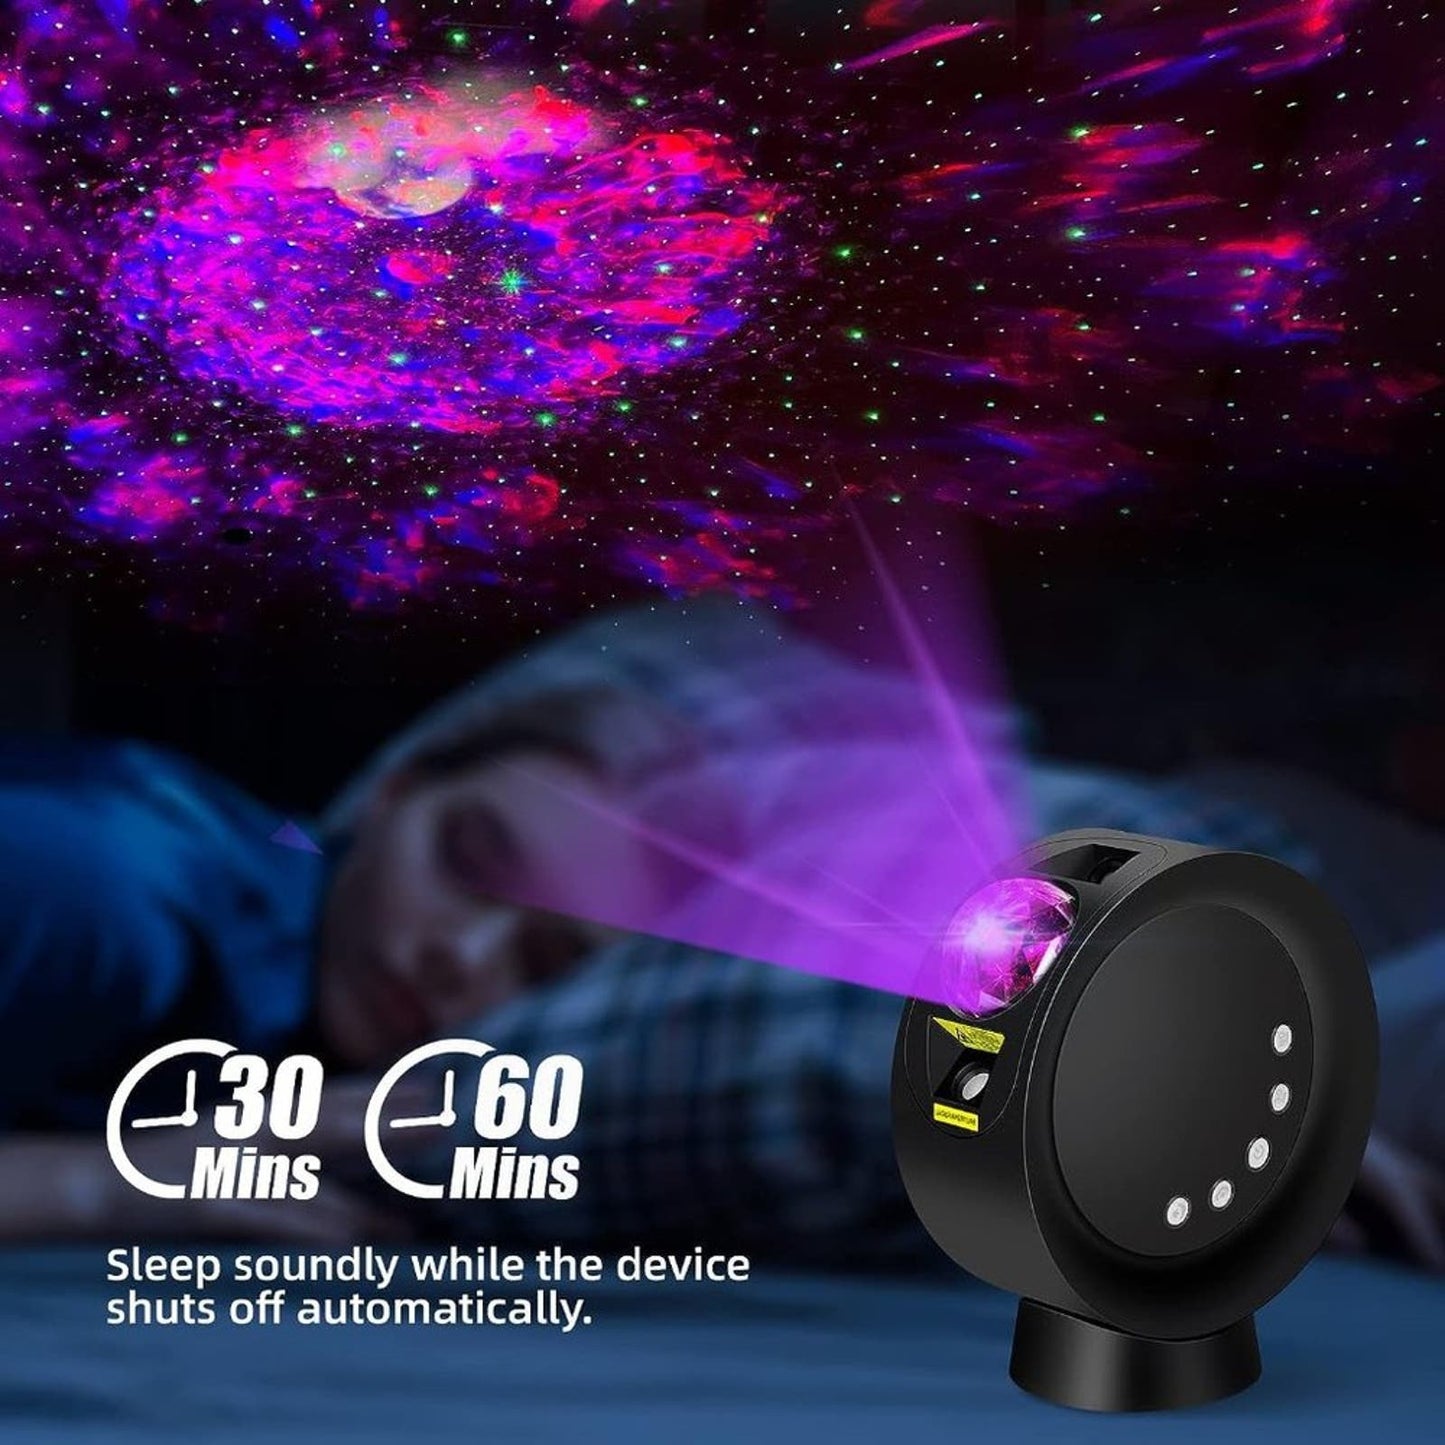 KIVOTAC Galaxy Star Projector with Remote Control, Adjustable Brightness